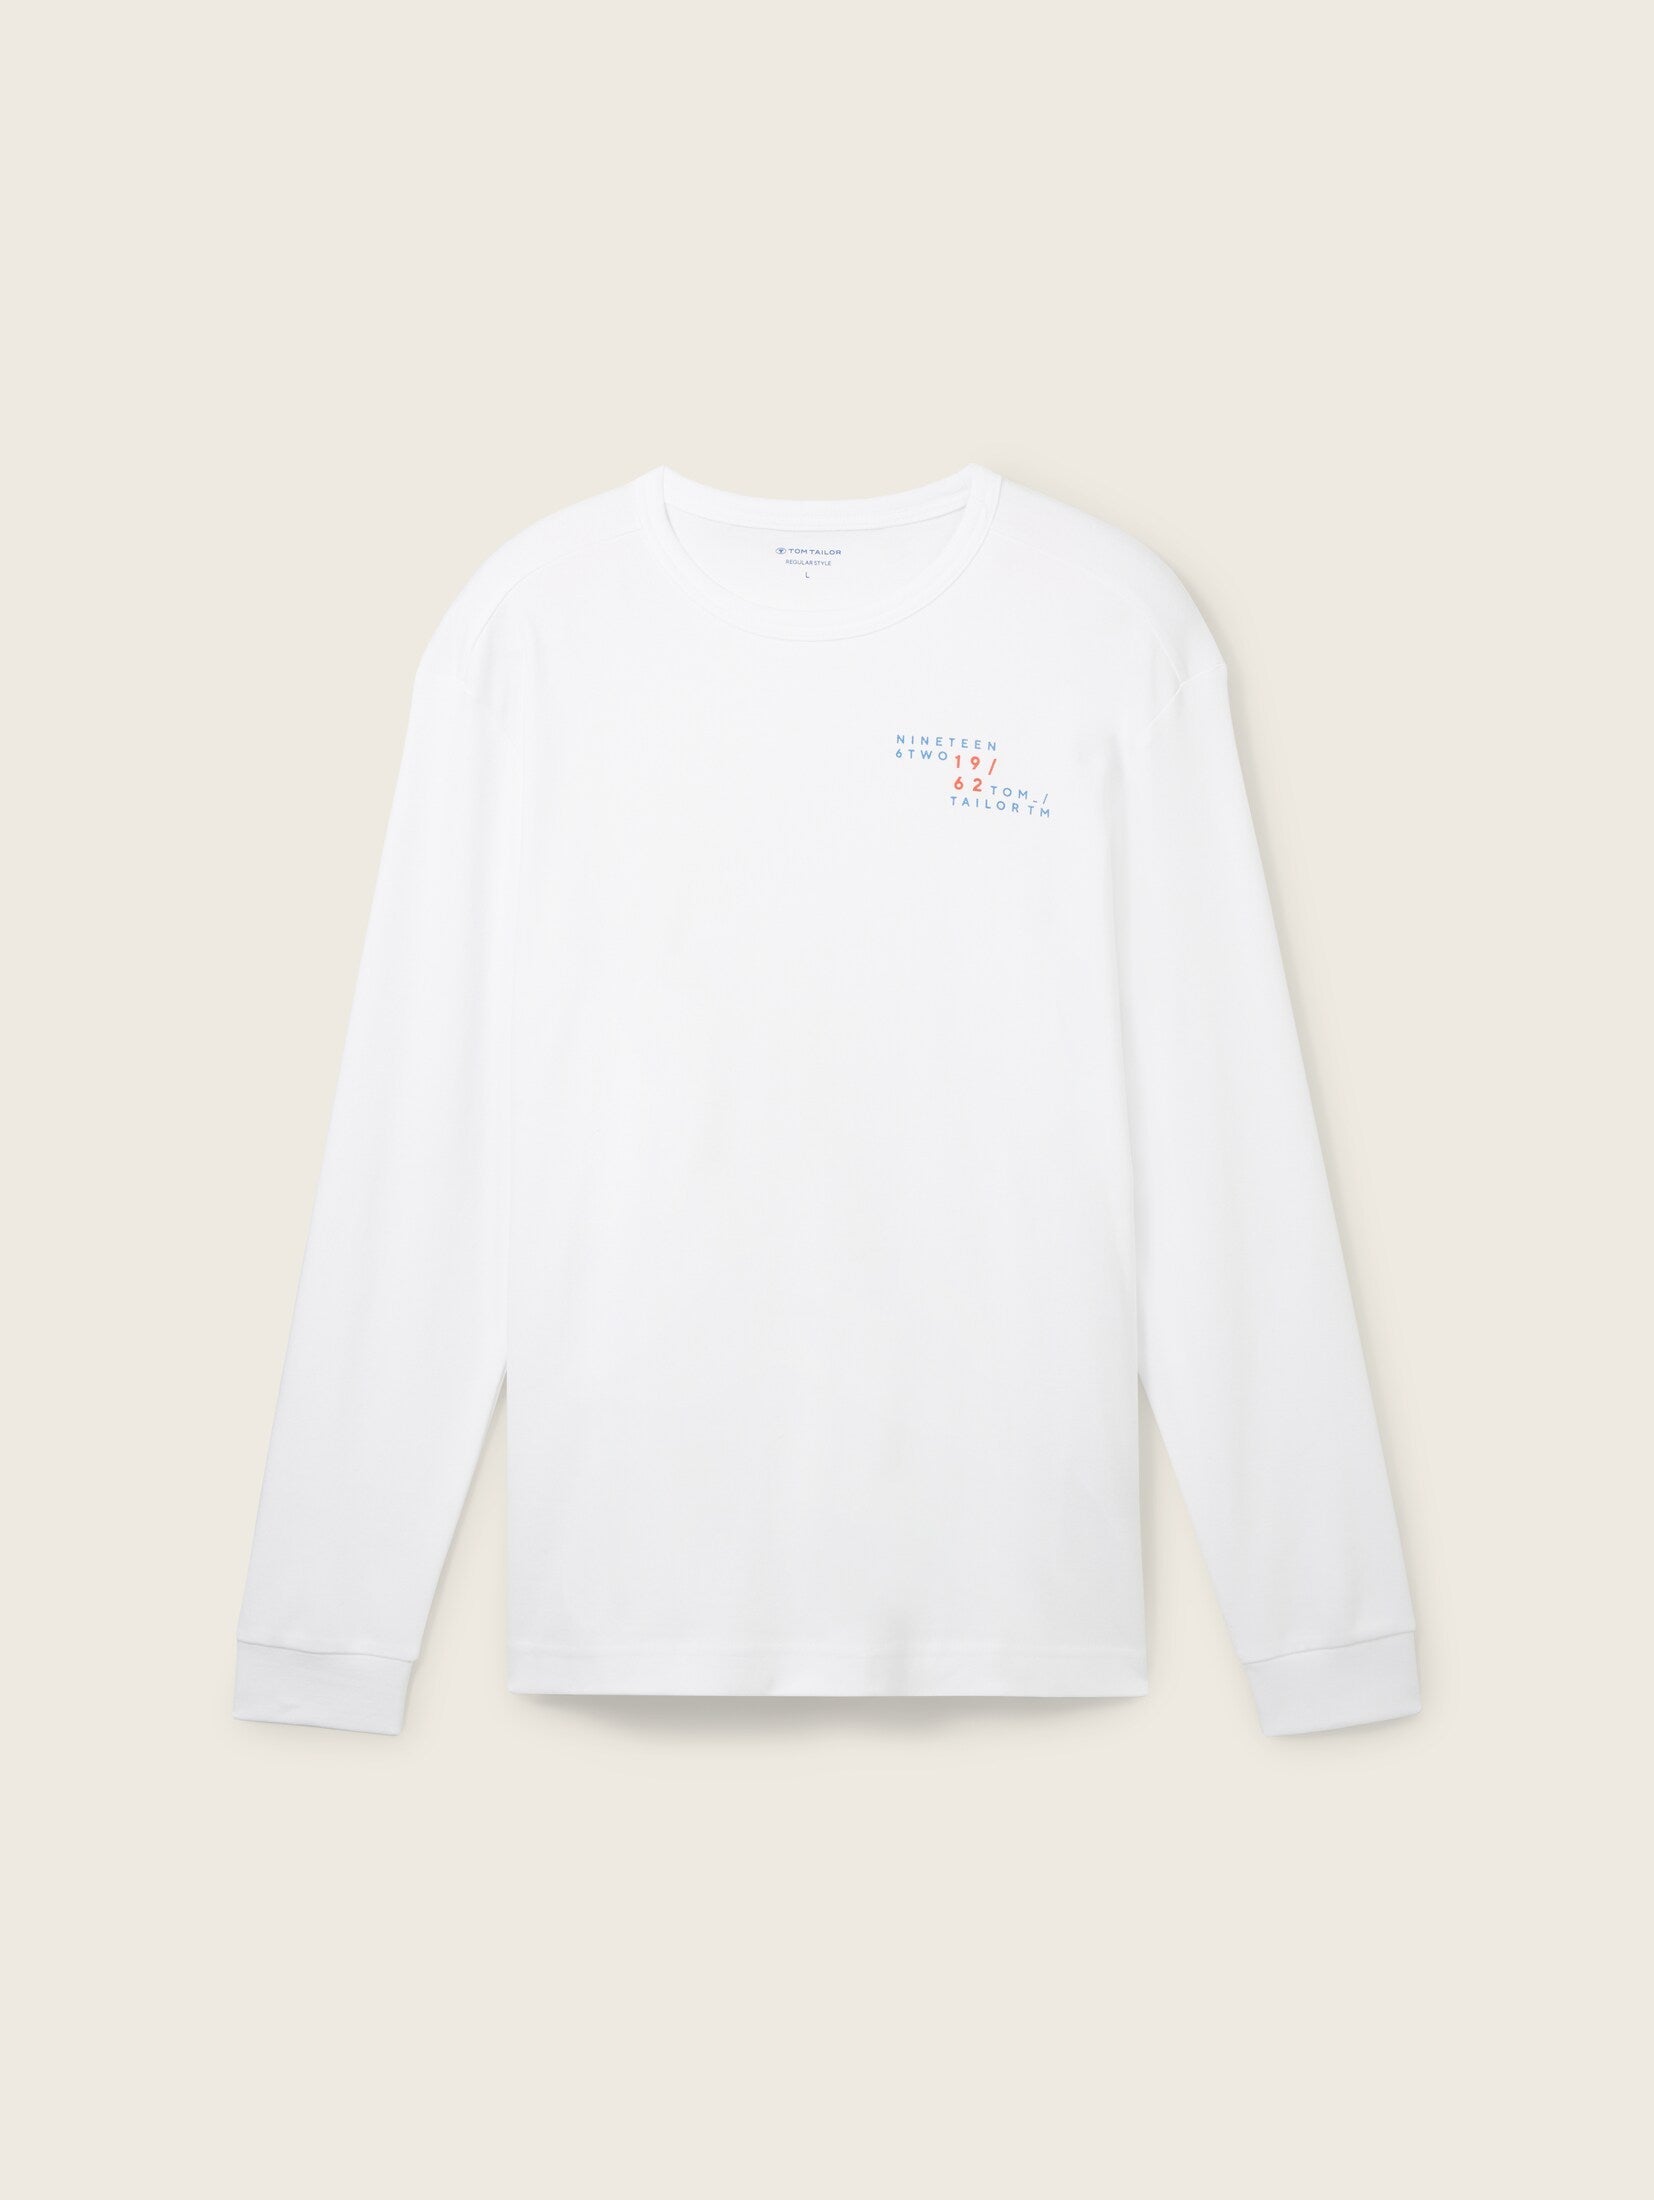 Tom Tailor White Basic Long-sleeved T-shirt With A Print